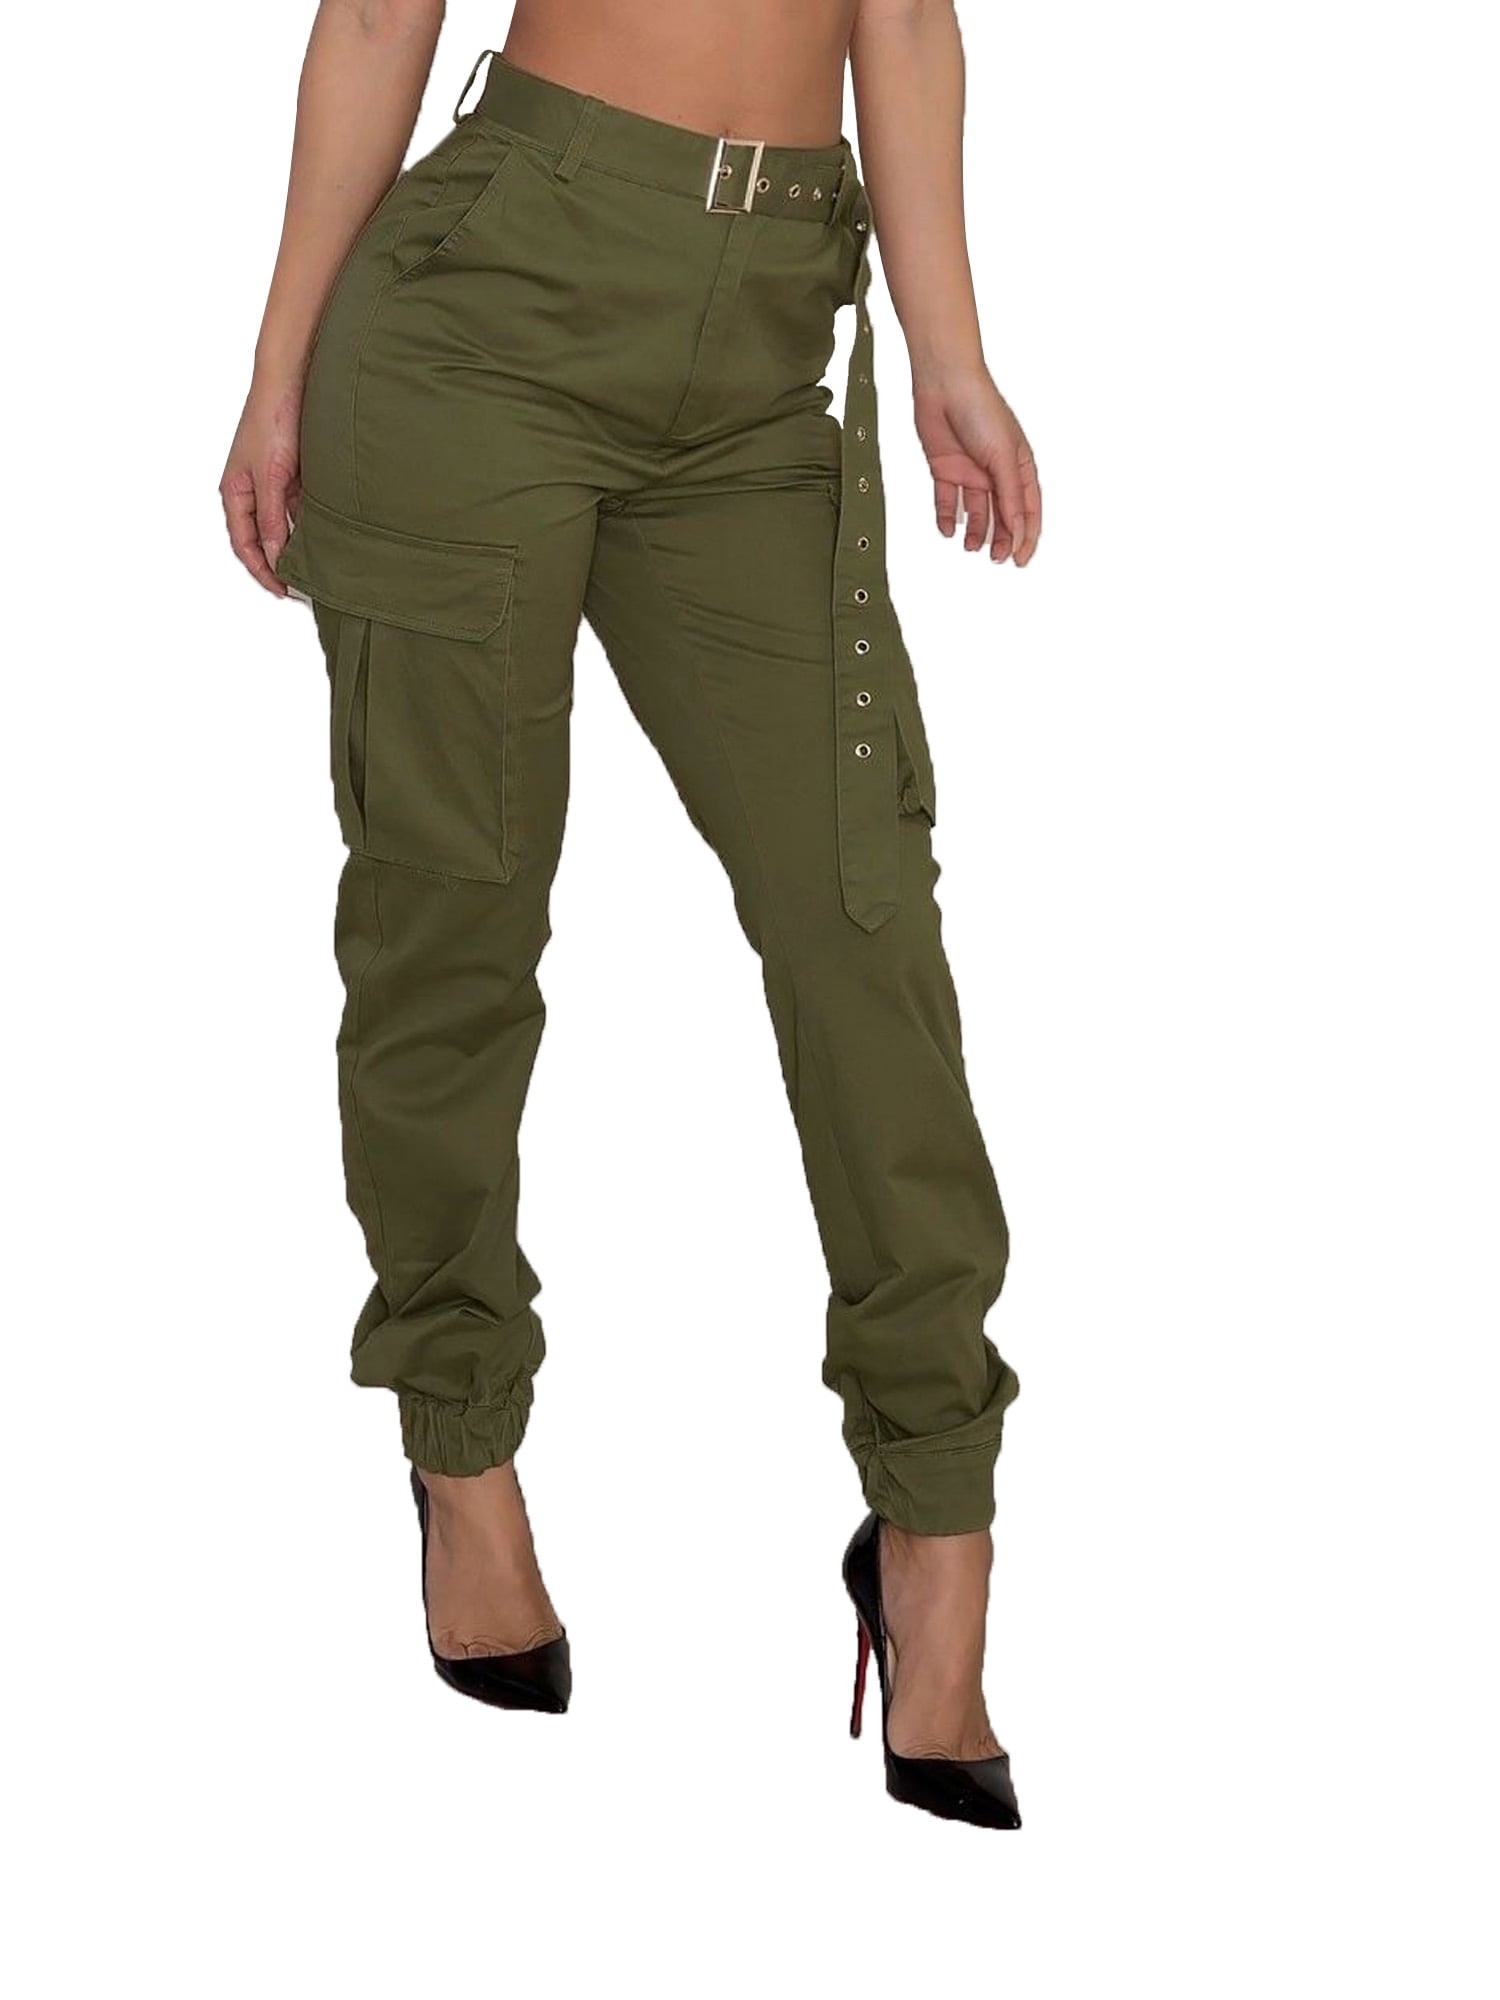 army jeans womens